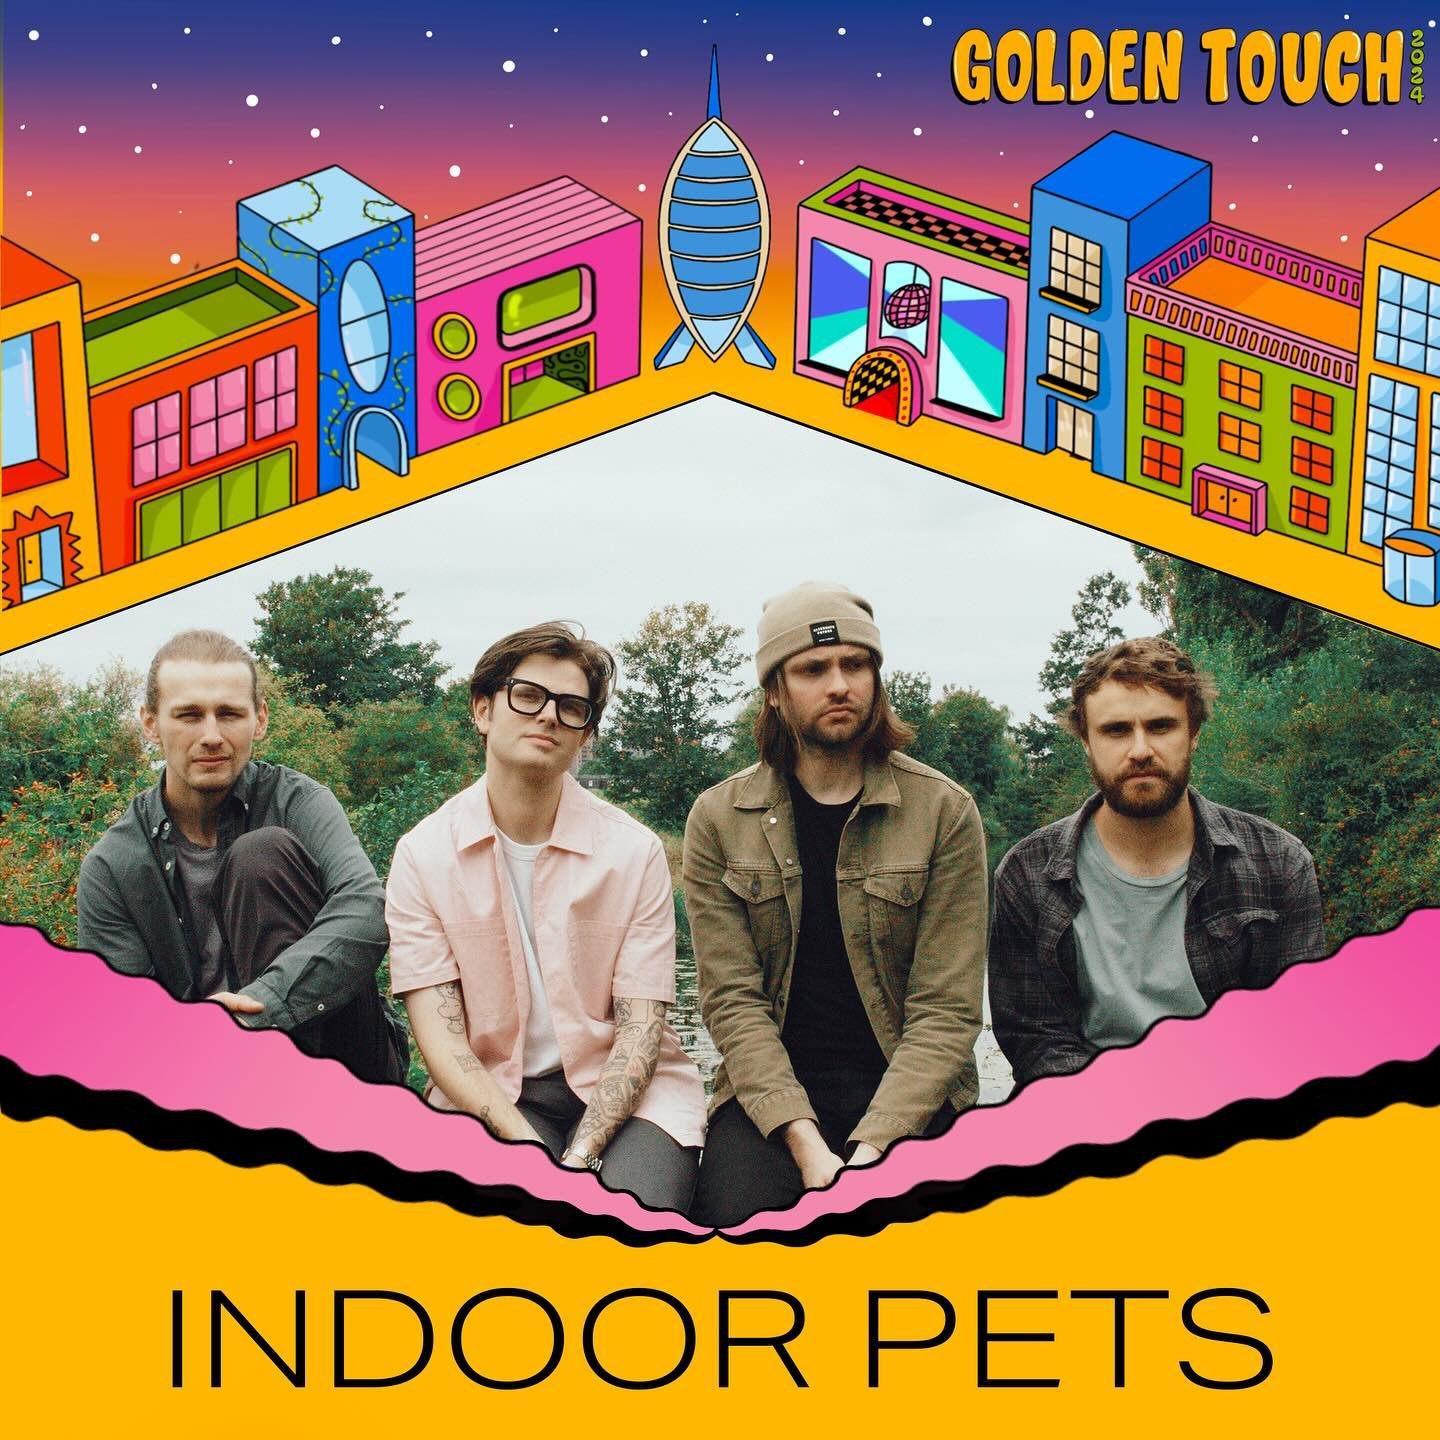 People of the south coast! You may be feeling left out of our May headline tour shenanigans but fear not, for we will be out in full force at the @goldentouchfestival at the @wedgewoodrooms in Portsmouth on the 8th June. Tickets are selling quickly s